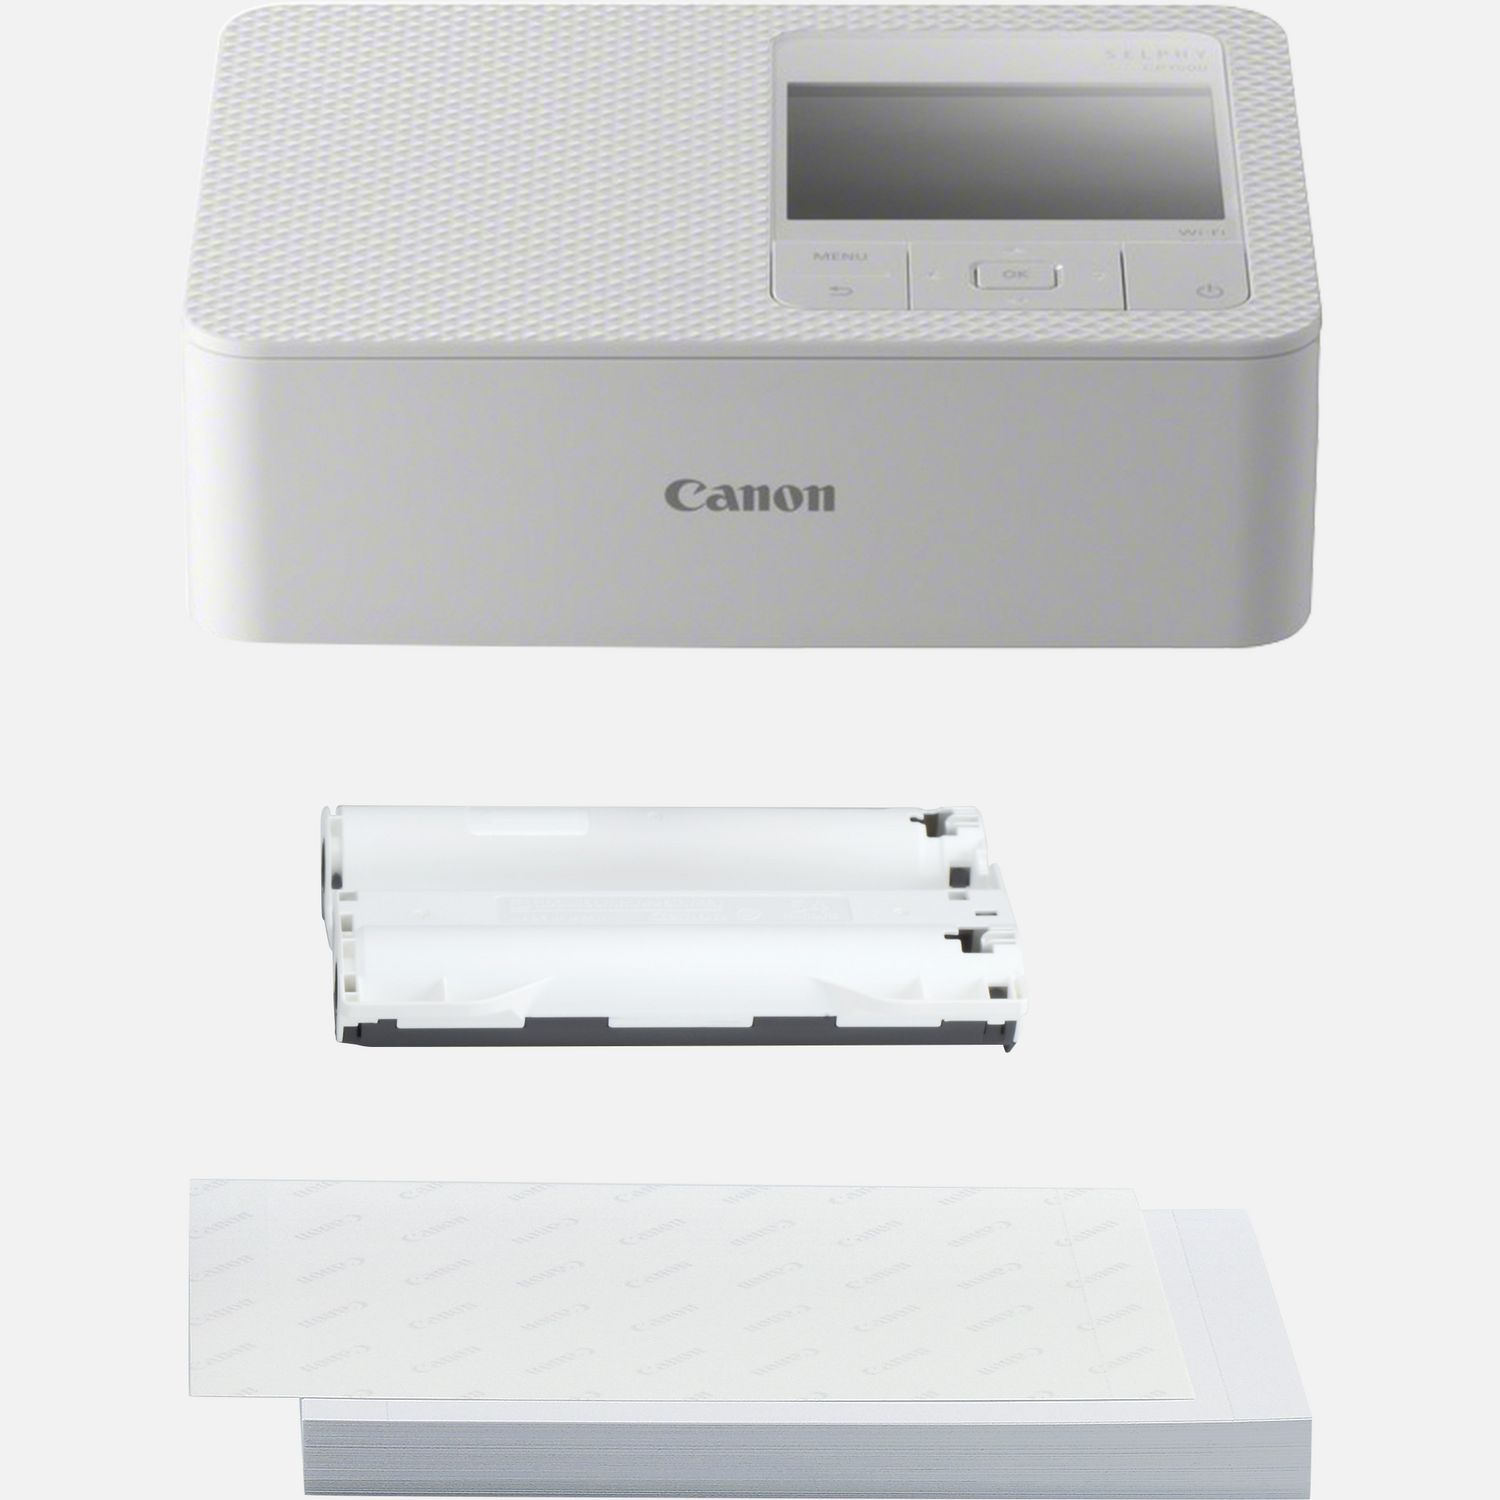 Review: Canon SELPHY CP1500 Compact Photo Printer – Smart Home